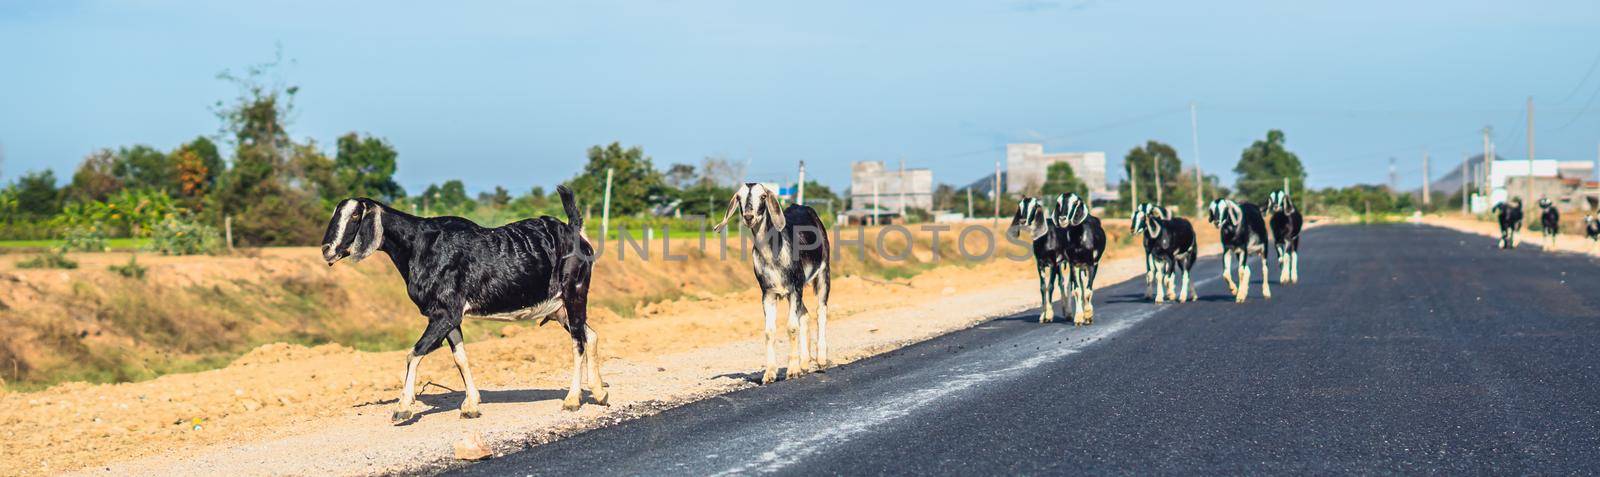 BANNER Beautiful summer landscape. Graceful black white goats glossy coats running suburb asphalt road near green trees grass blue sky. Cute farm animals care. Open air rustic village lifestyle by nandrey85